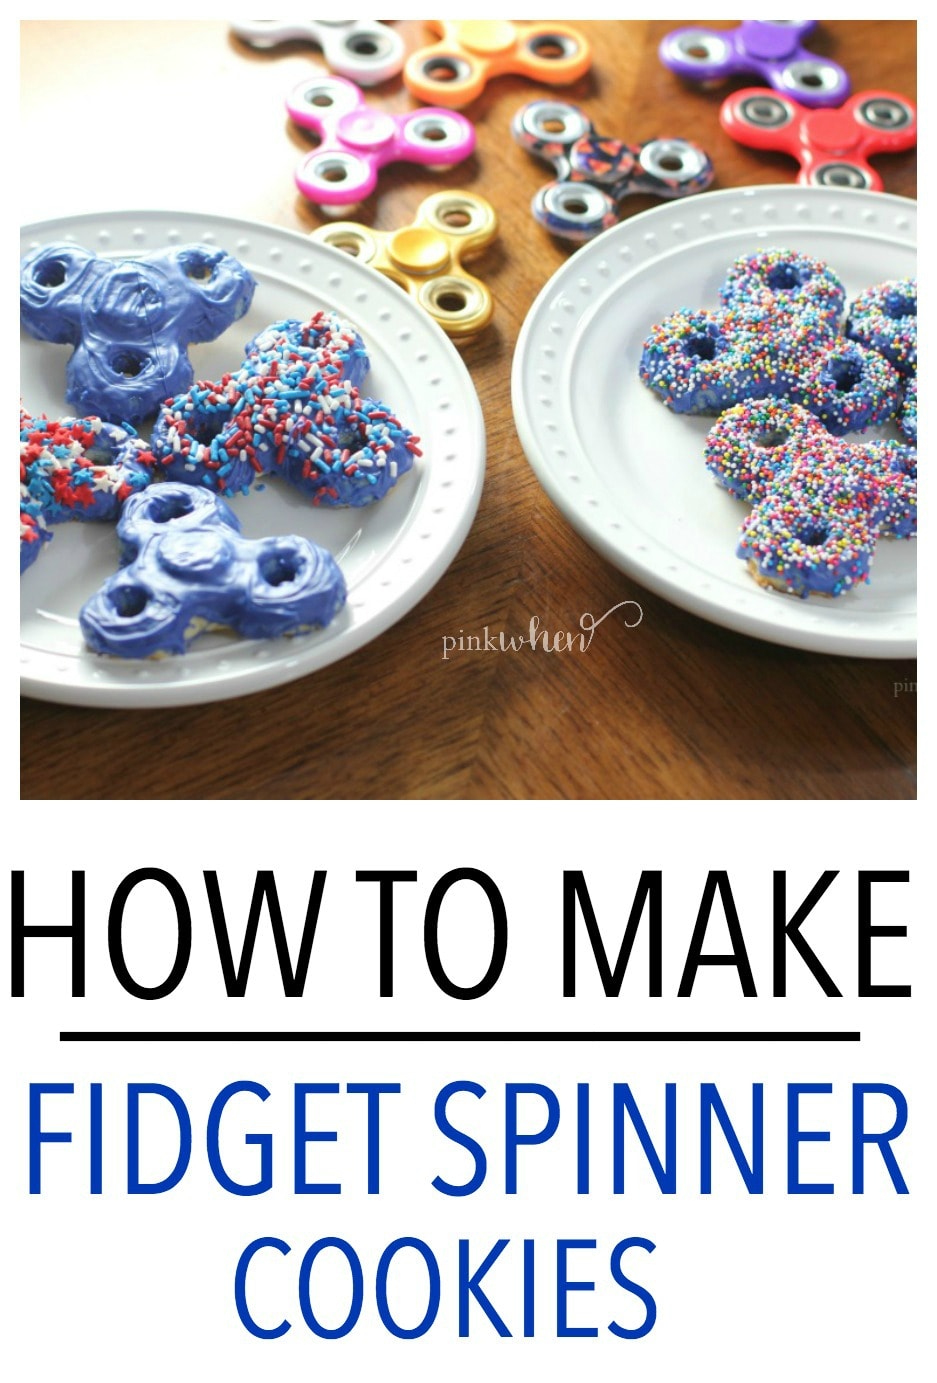 Learn how to make Fidget Spinner Cookies with this delicious sugar cookie recipe, including videos on how to make the cookie mold!